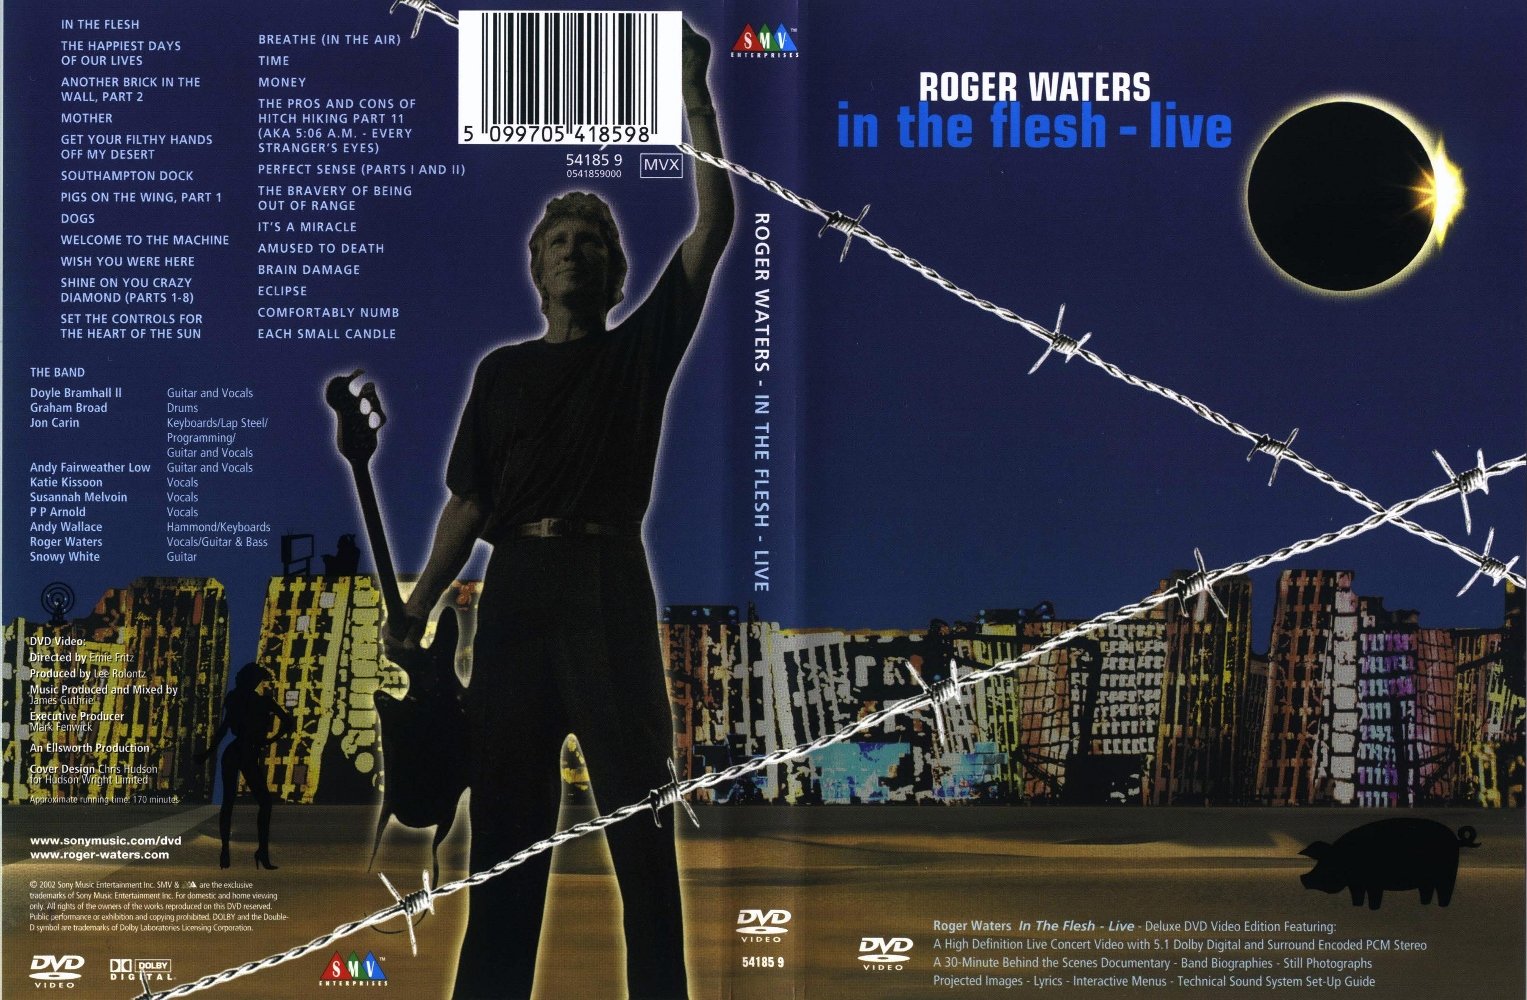 Jaquette DVD Roger Wathers - In the flesh